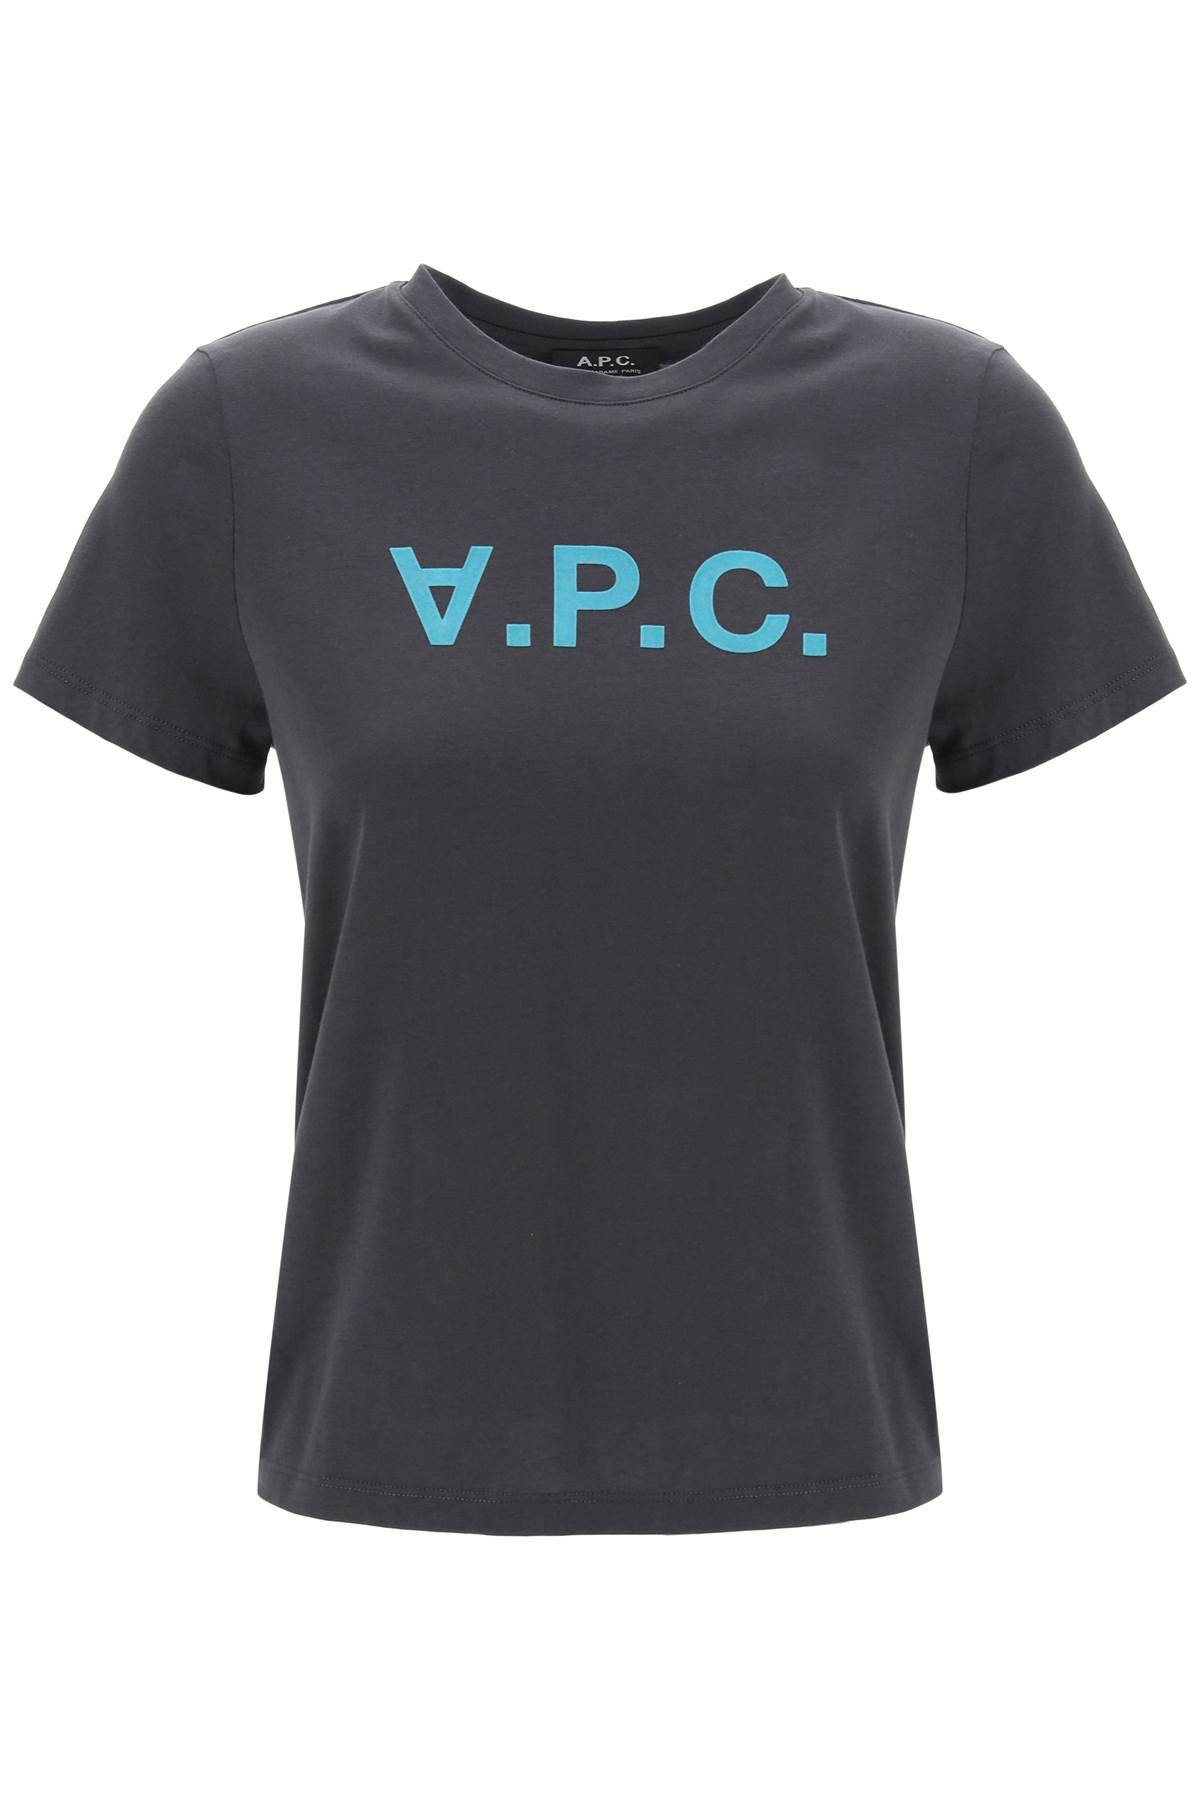 A.P.C. A. P.C. t-shirt with flocked vpc logo